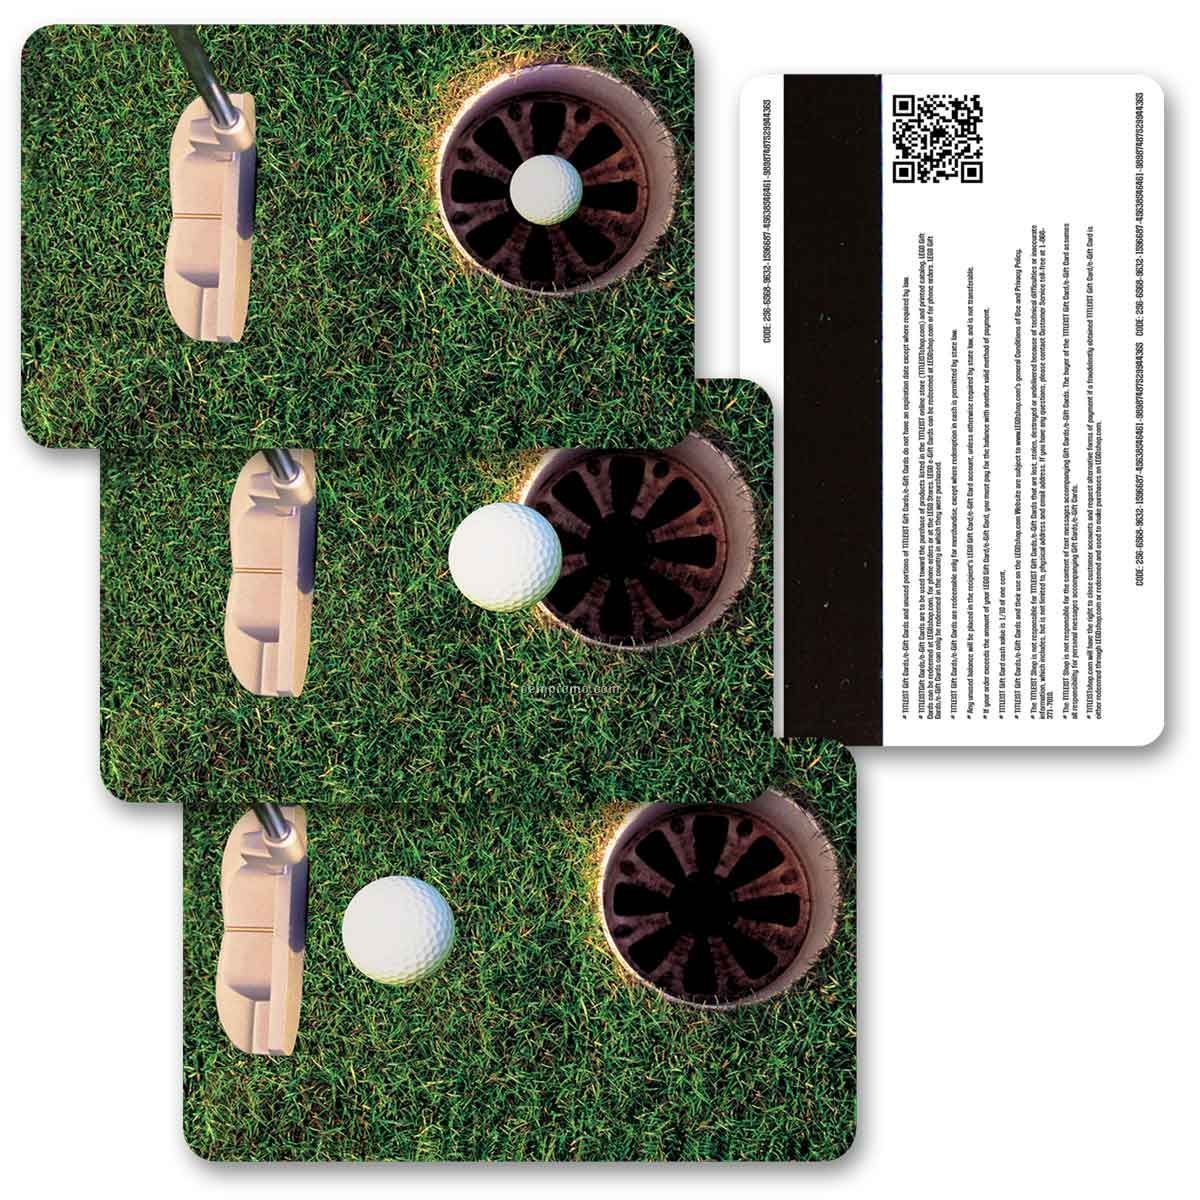 3d Lenticular Gift Card W/Animated Golf Putt Images (Blanks)